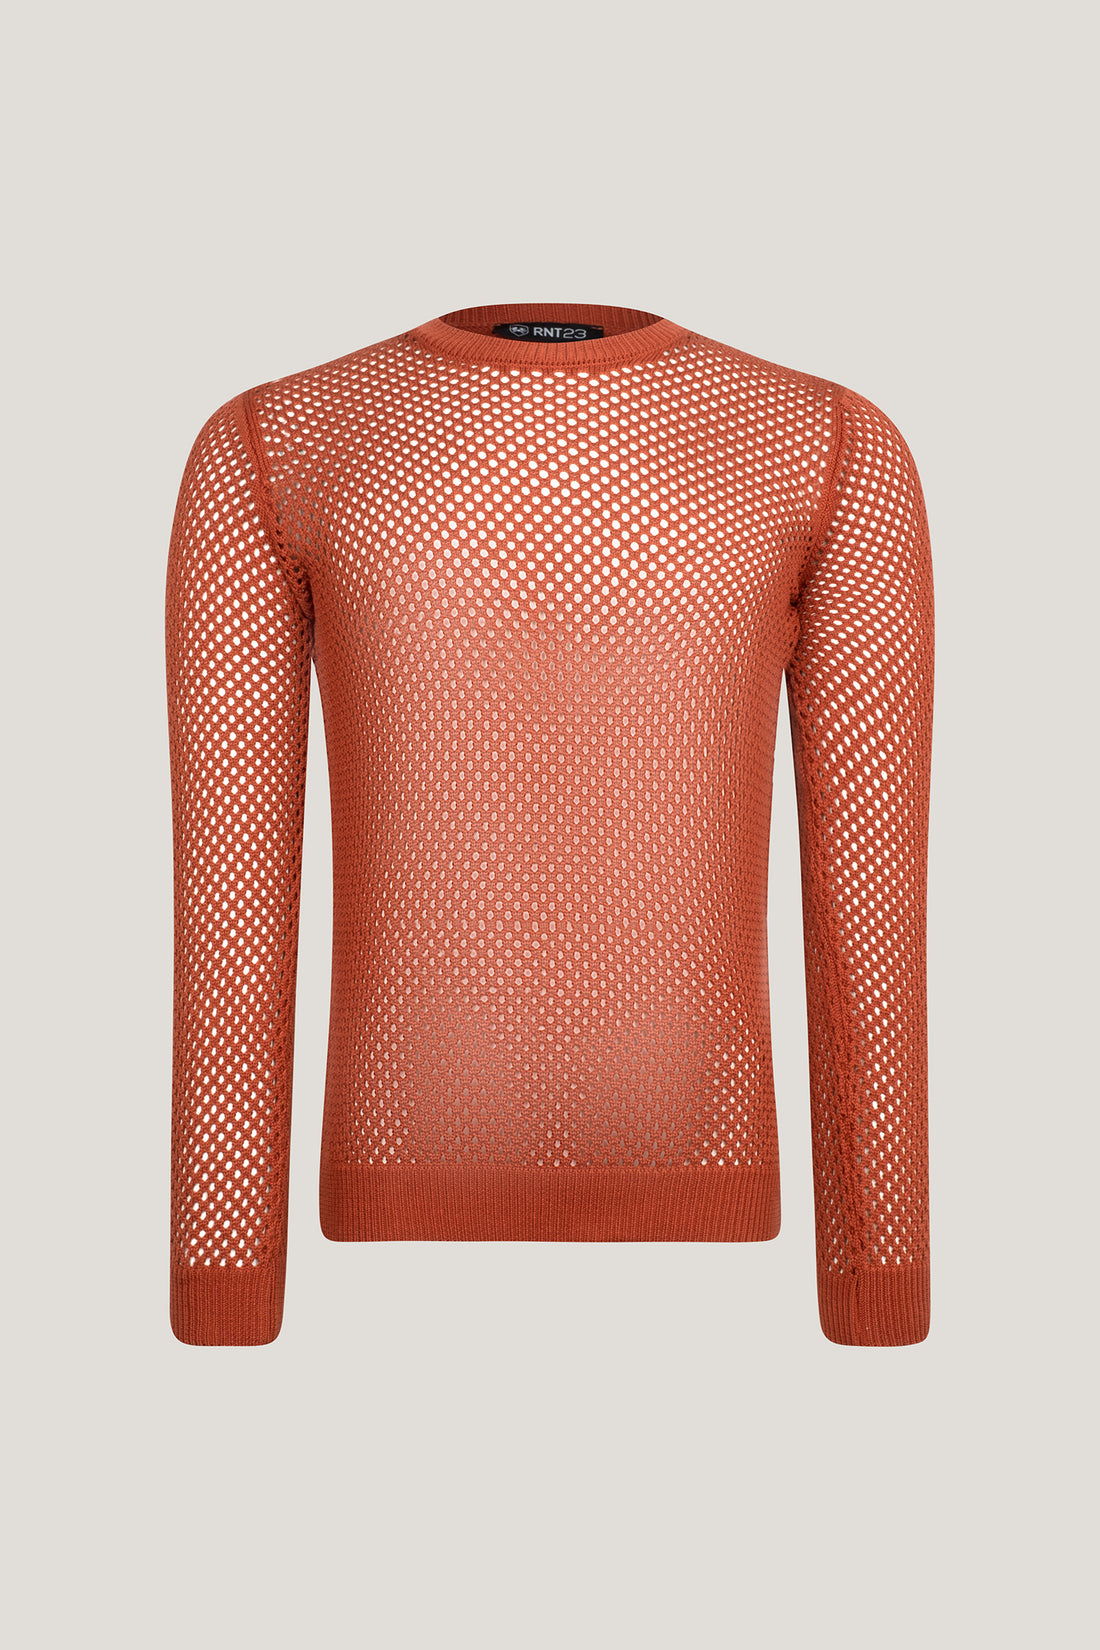 See Through Fishnet Muscle Fit Shirt - Tile